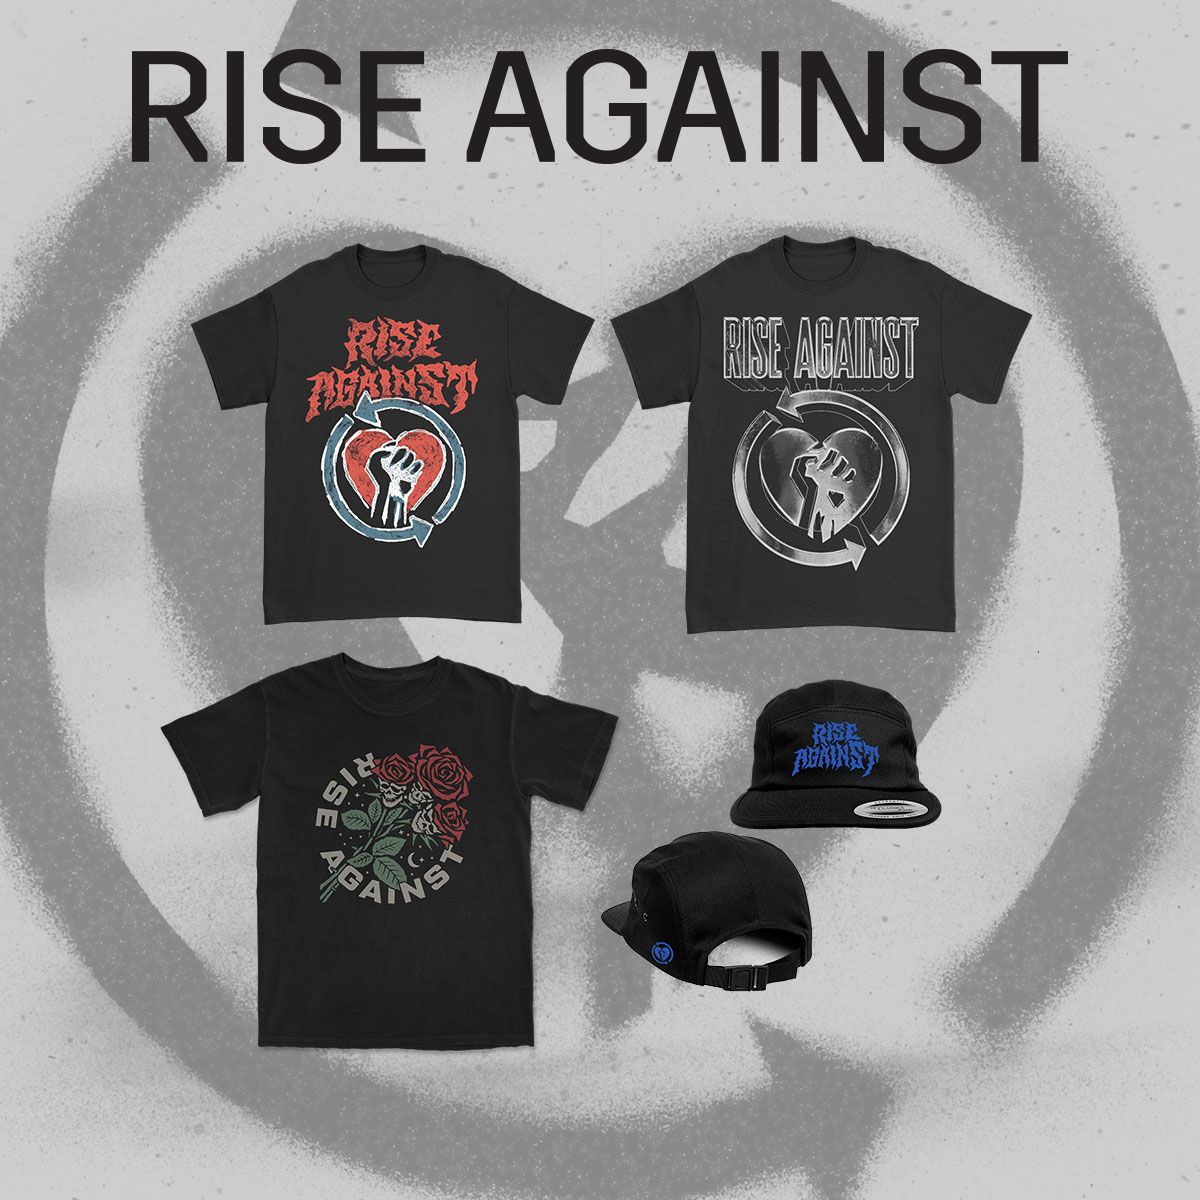 New merch is available in the Rise Against webstore. Shop now at riseagainst.store.